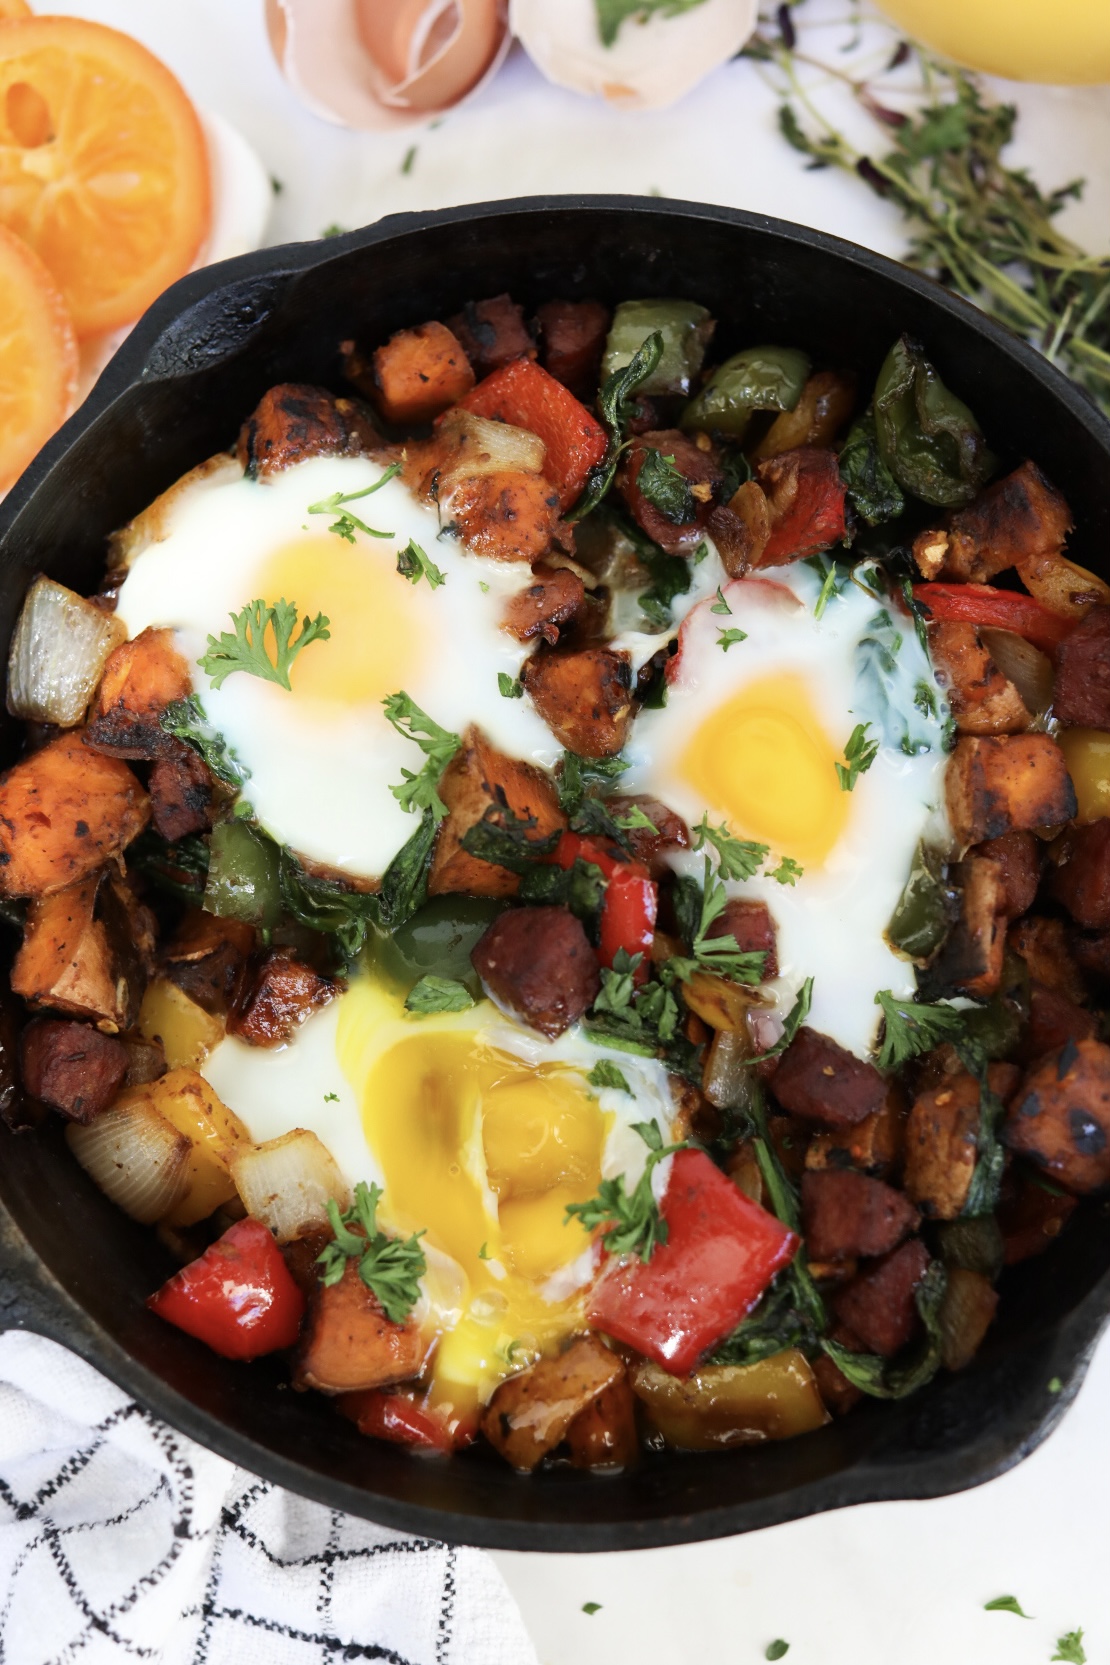 Top view of sweet potato hash with final recipe and one runny egg.